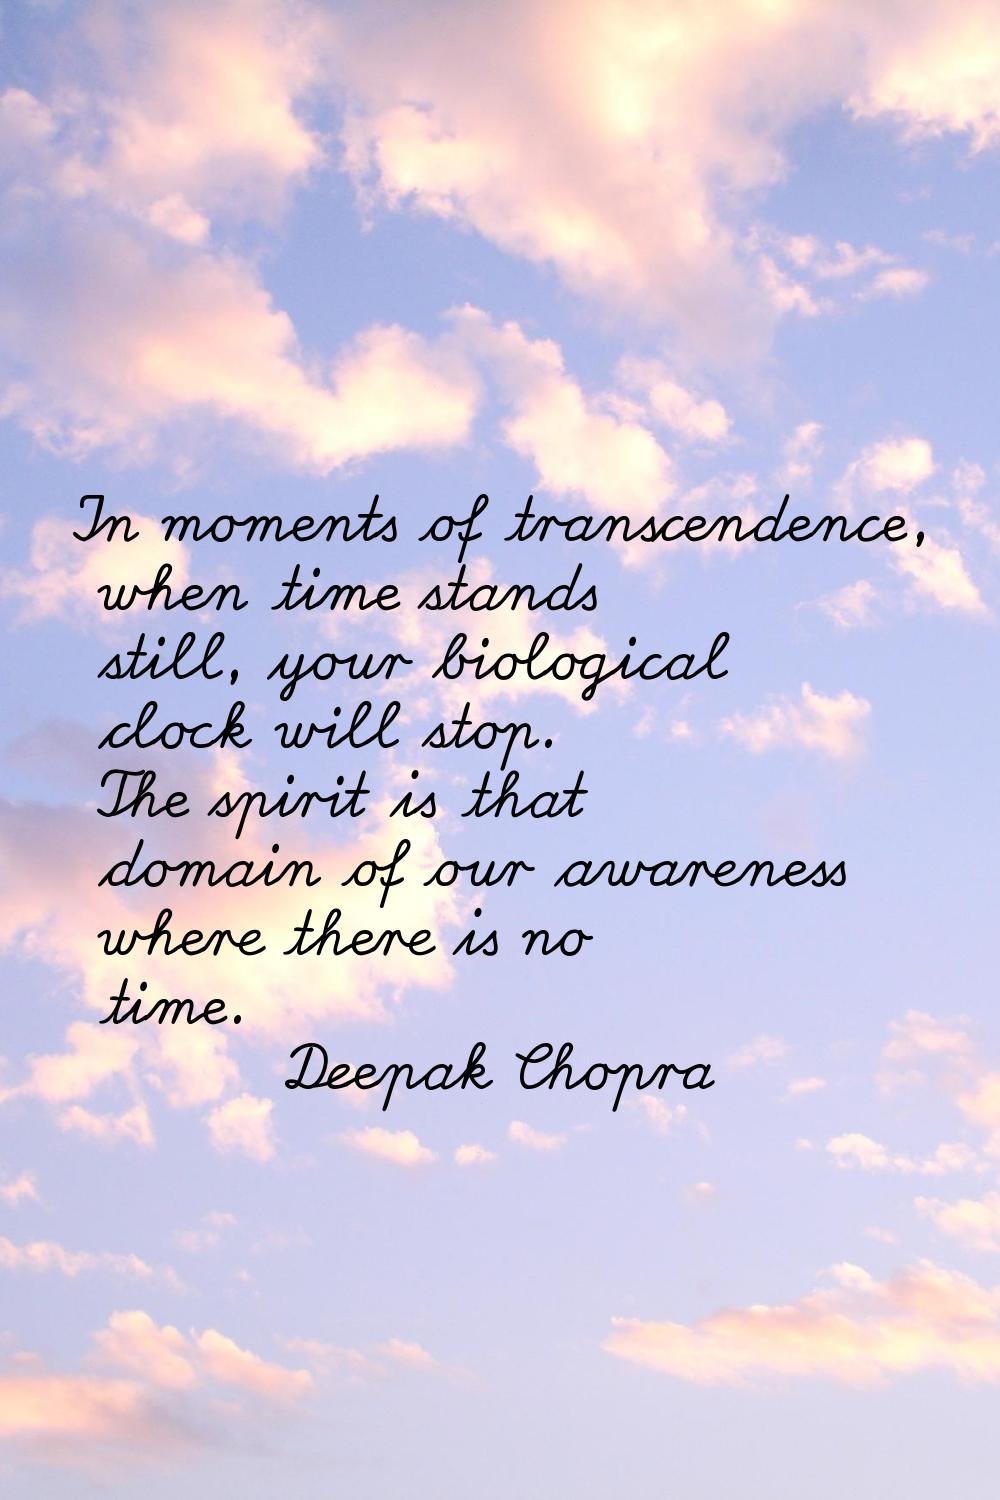 In moments of transcendence, when time stands still, your biological clock will stop. The spirit is